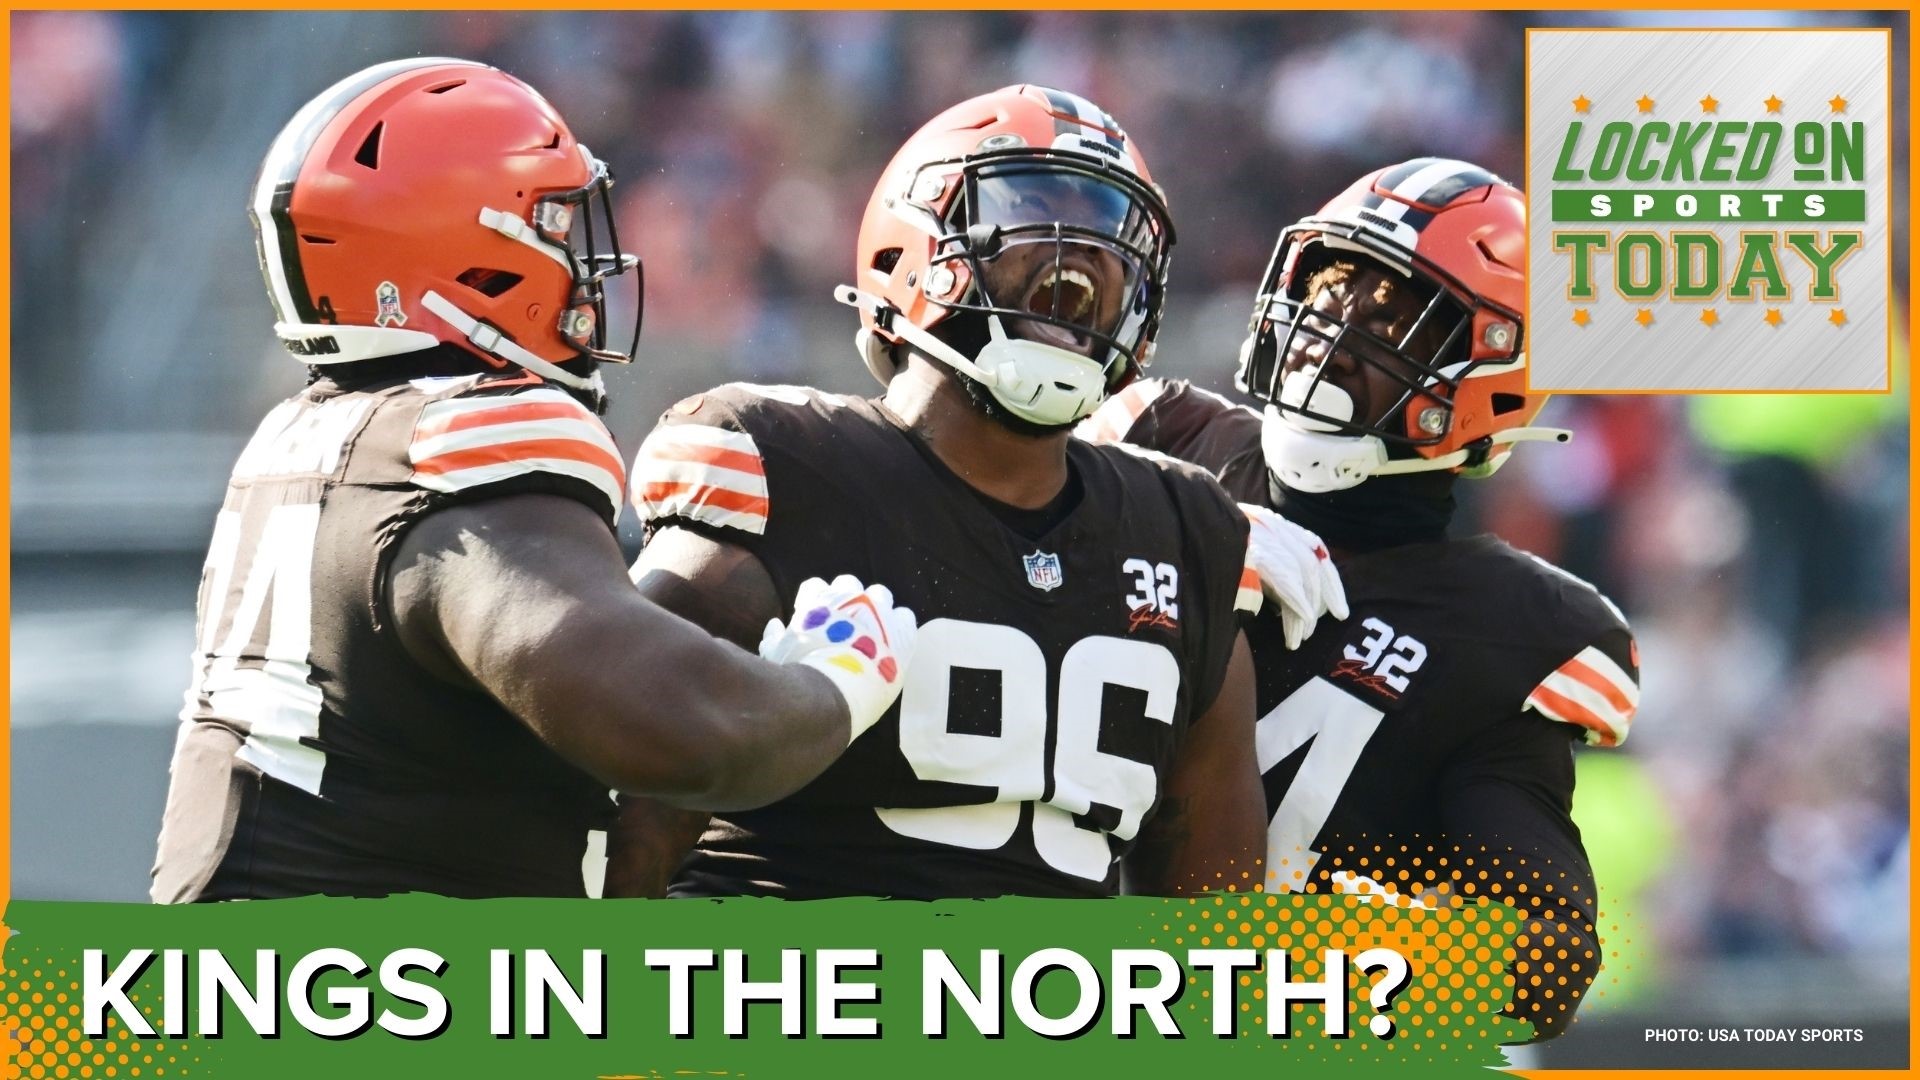 Discussing the day's top sports stories from the Browns facing off against the Ravens to the Bucks can't keep up with the Pacers.